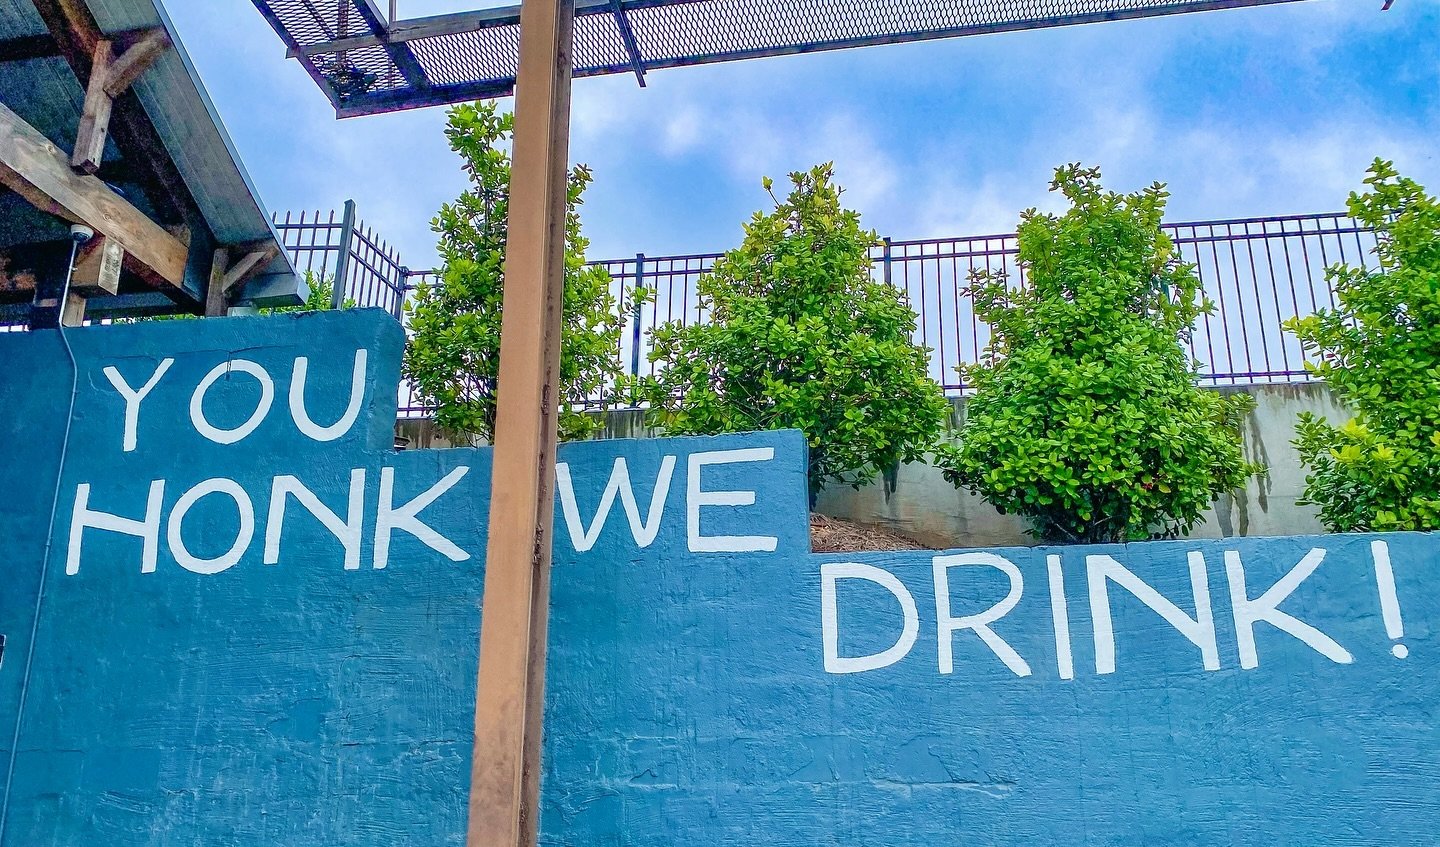 Has anyone peeped our new mural? 👀

You HONK, we DRINK🙌🍻

We all know how Chattahoochee Ave can get 😳 so we came up with a way for people in traffic to get in on the action 👏

The rules of the game are simple&hellip;hear some honks off good ole 